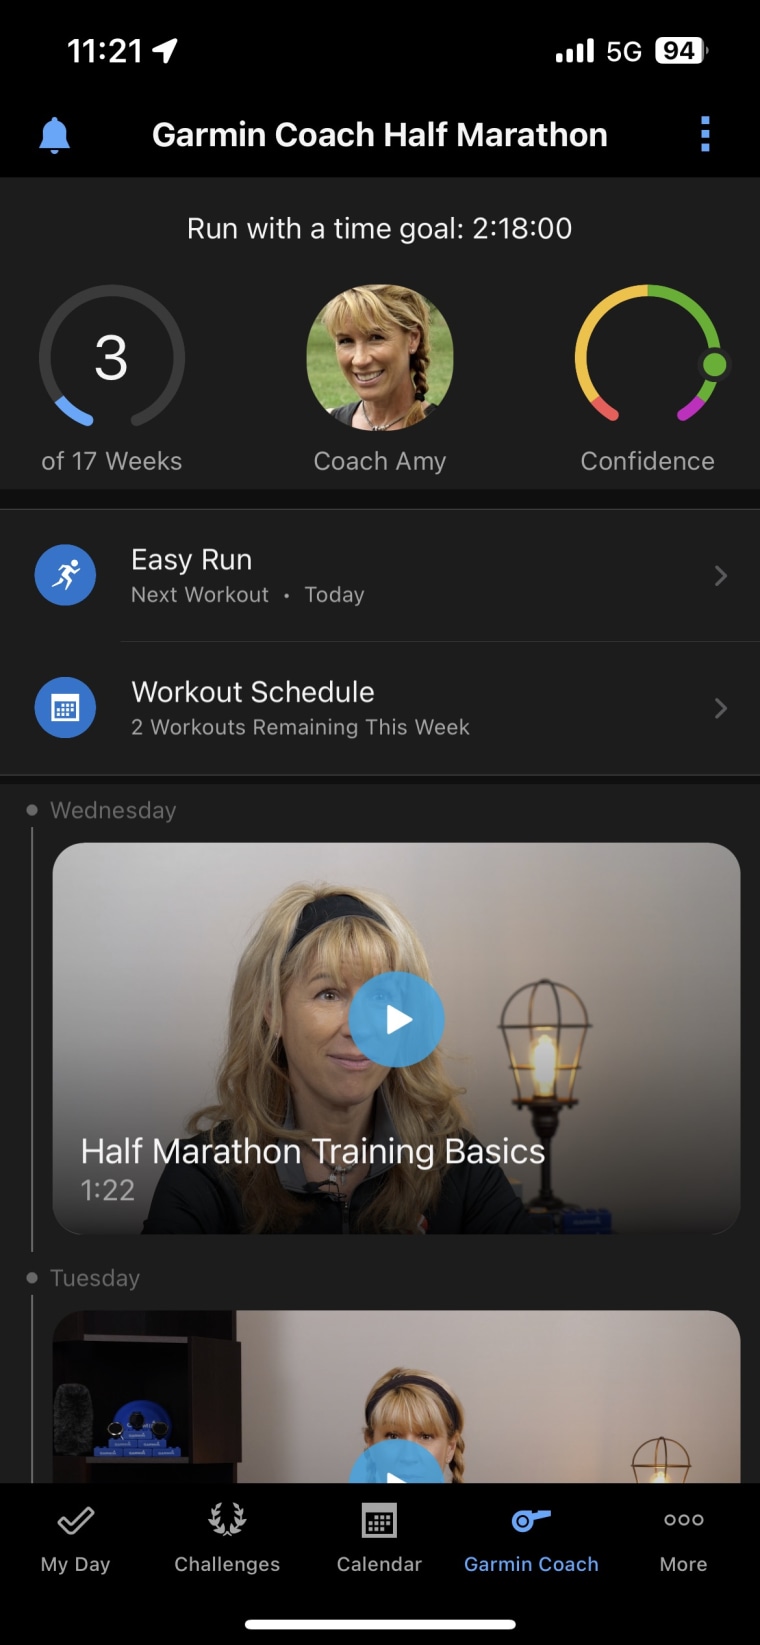 An image of the Garmin Coach screen within the Garmin Connect app, showing upcoming runs and training videos from the Garmin virtual coach.